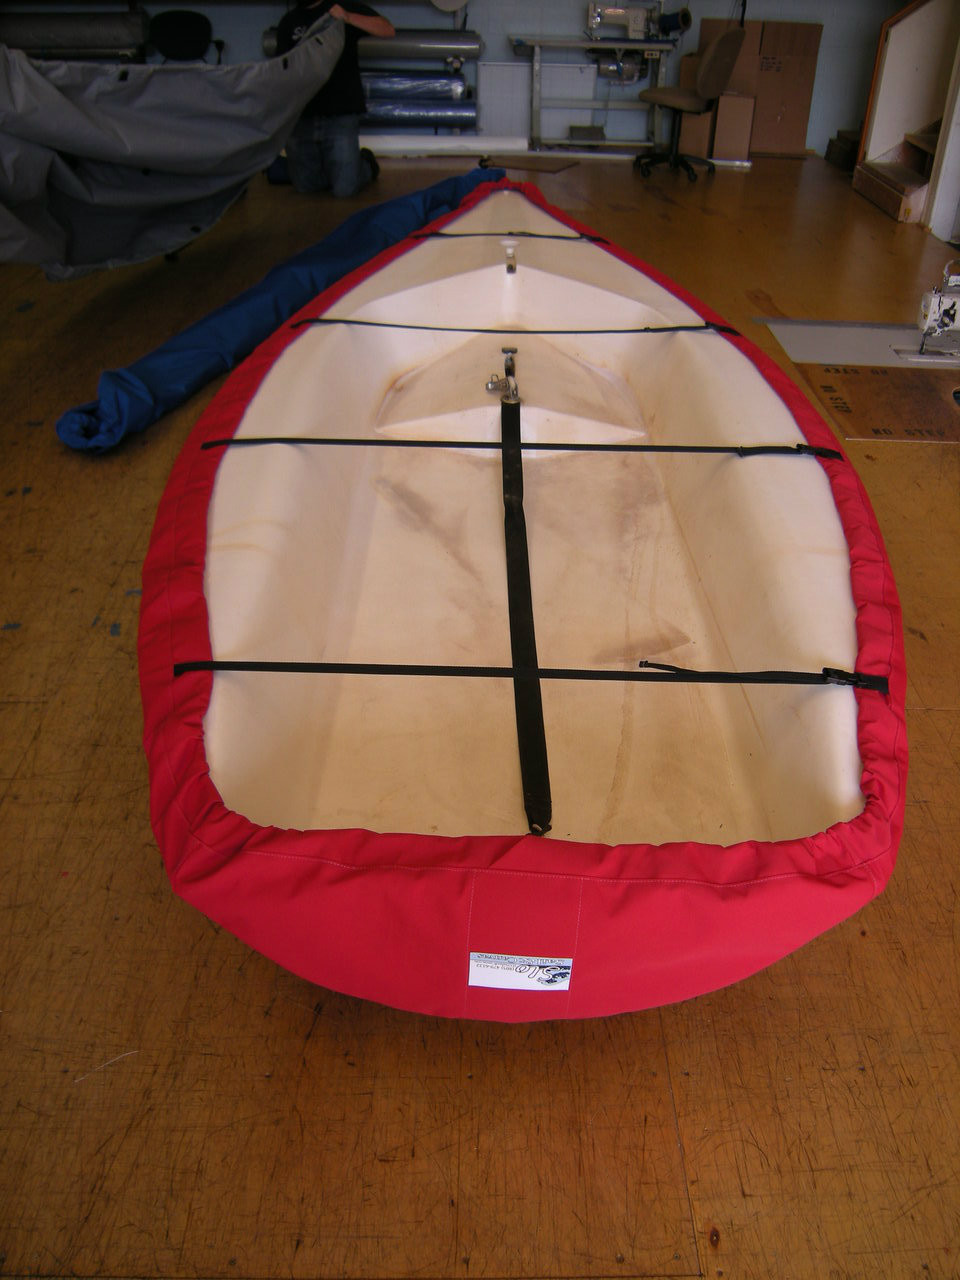 Holder 12 sailboat Bottom Cover by SLO Sail and Canvas. Polypropylene straps with plastic Fastex buckles, included. Cover shown in Sunbrella Jockey Red. Available in 3 fabrics and many color choices.

